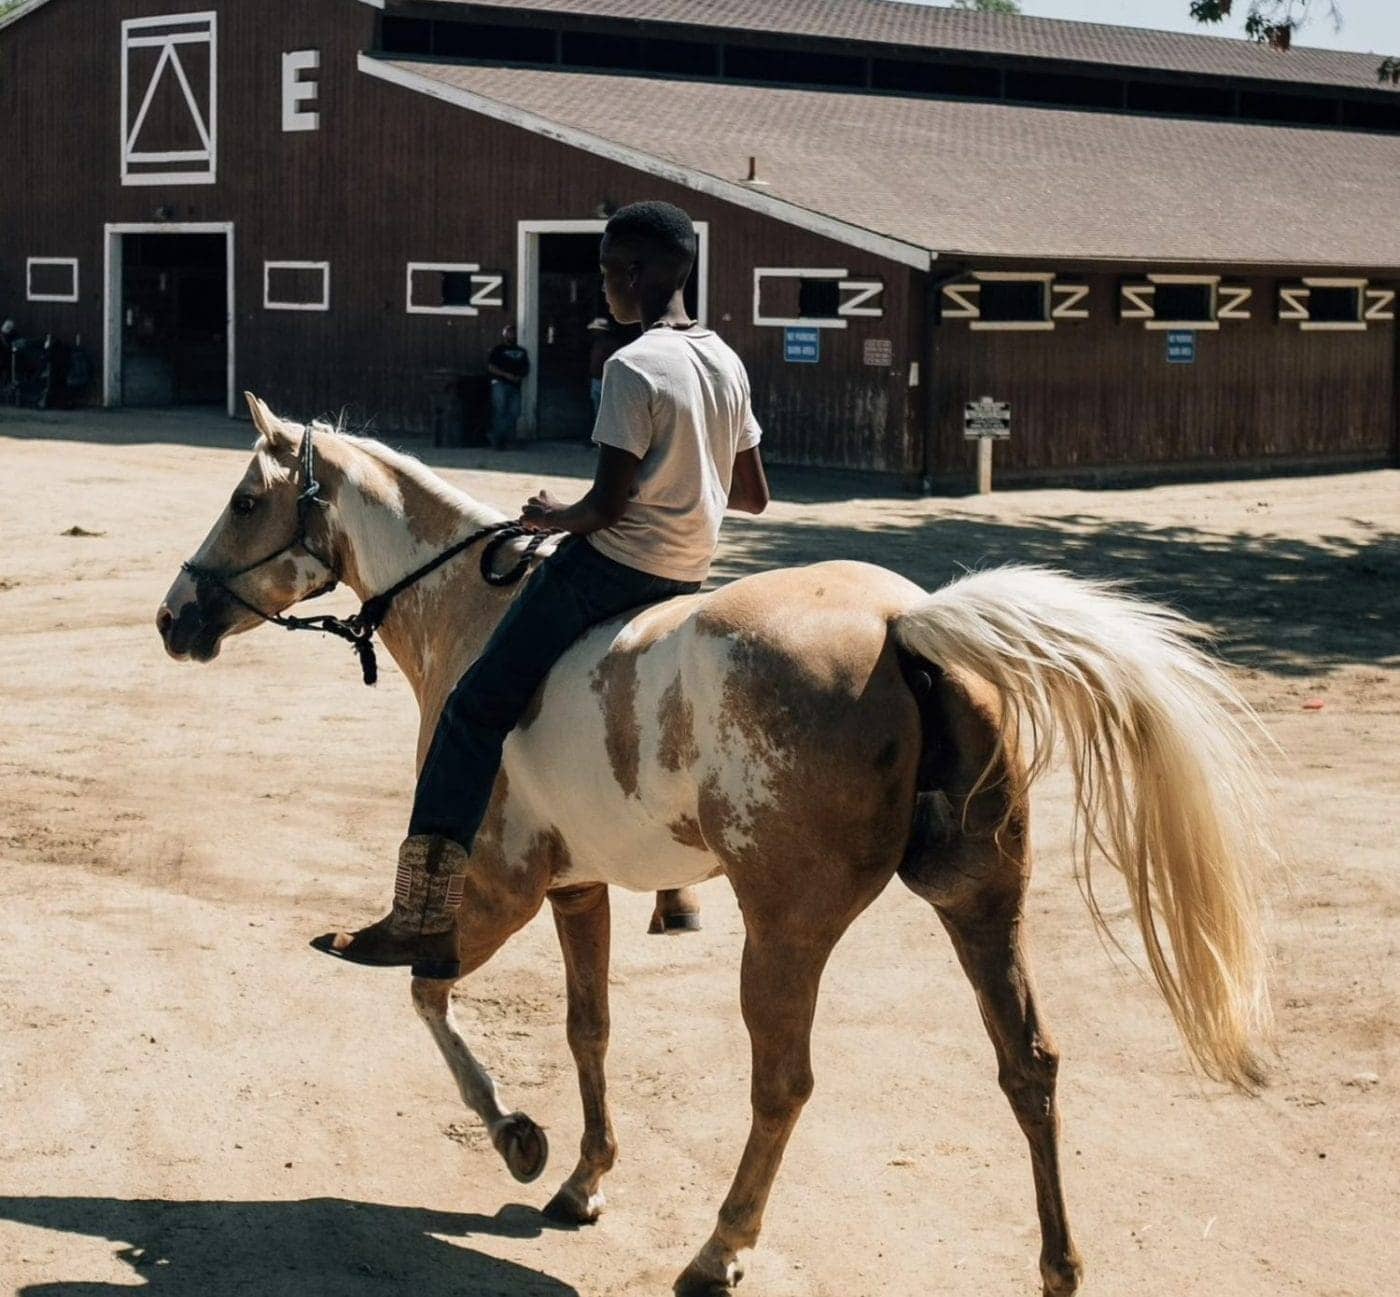 Black-youngster-rides-bareback-in-Young-Bucks-1400x1297, Oakland Int’l Film Fest’s ‘Young Bucks’ explores today’s Black cowboy culture, Culture Currents Local News & Views 